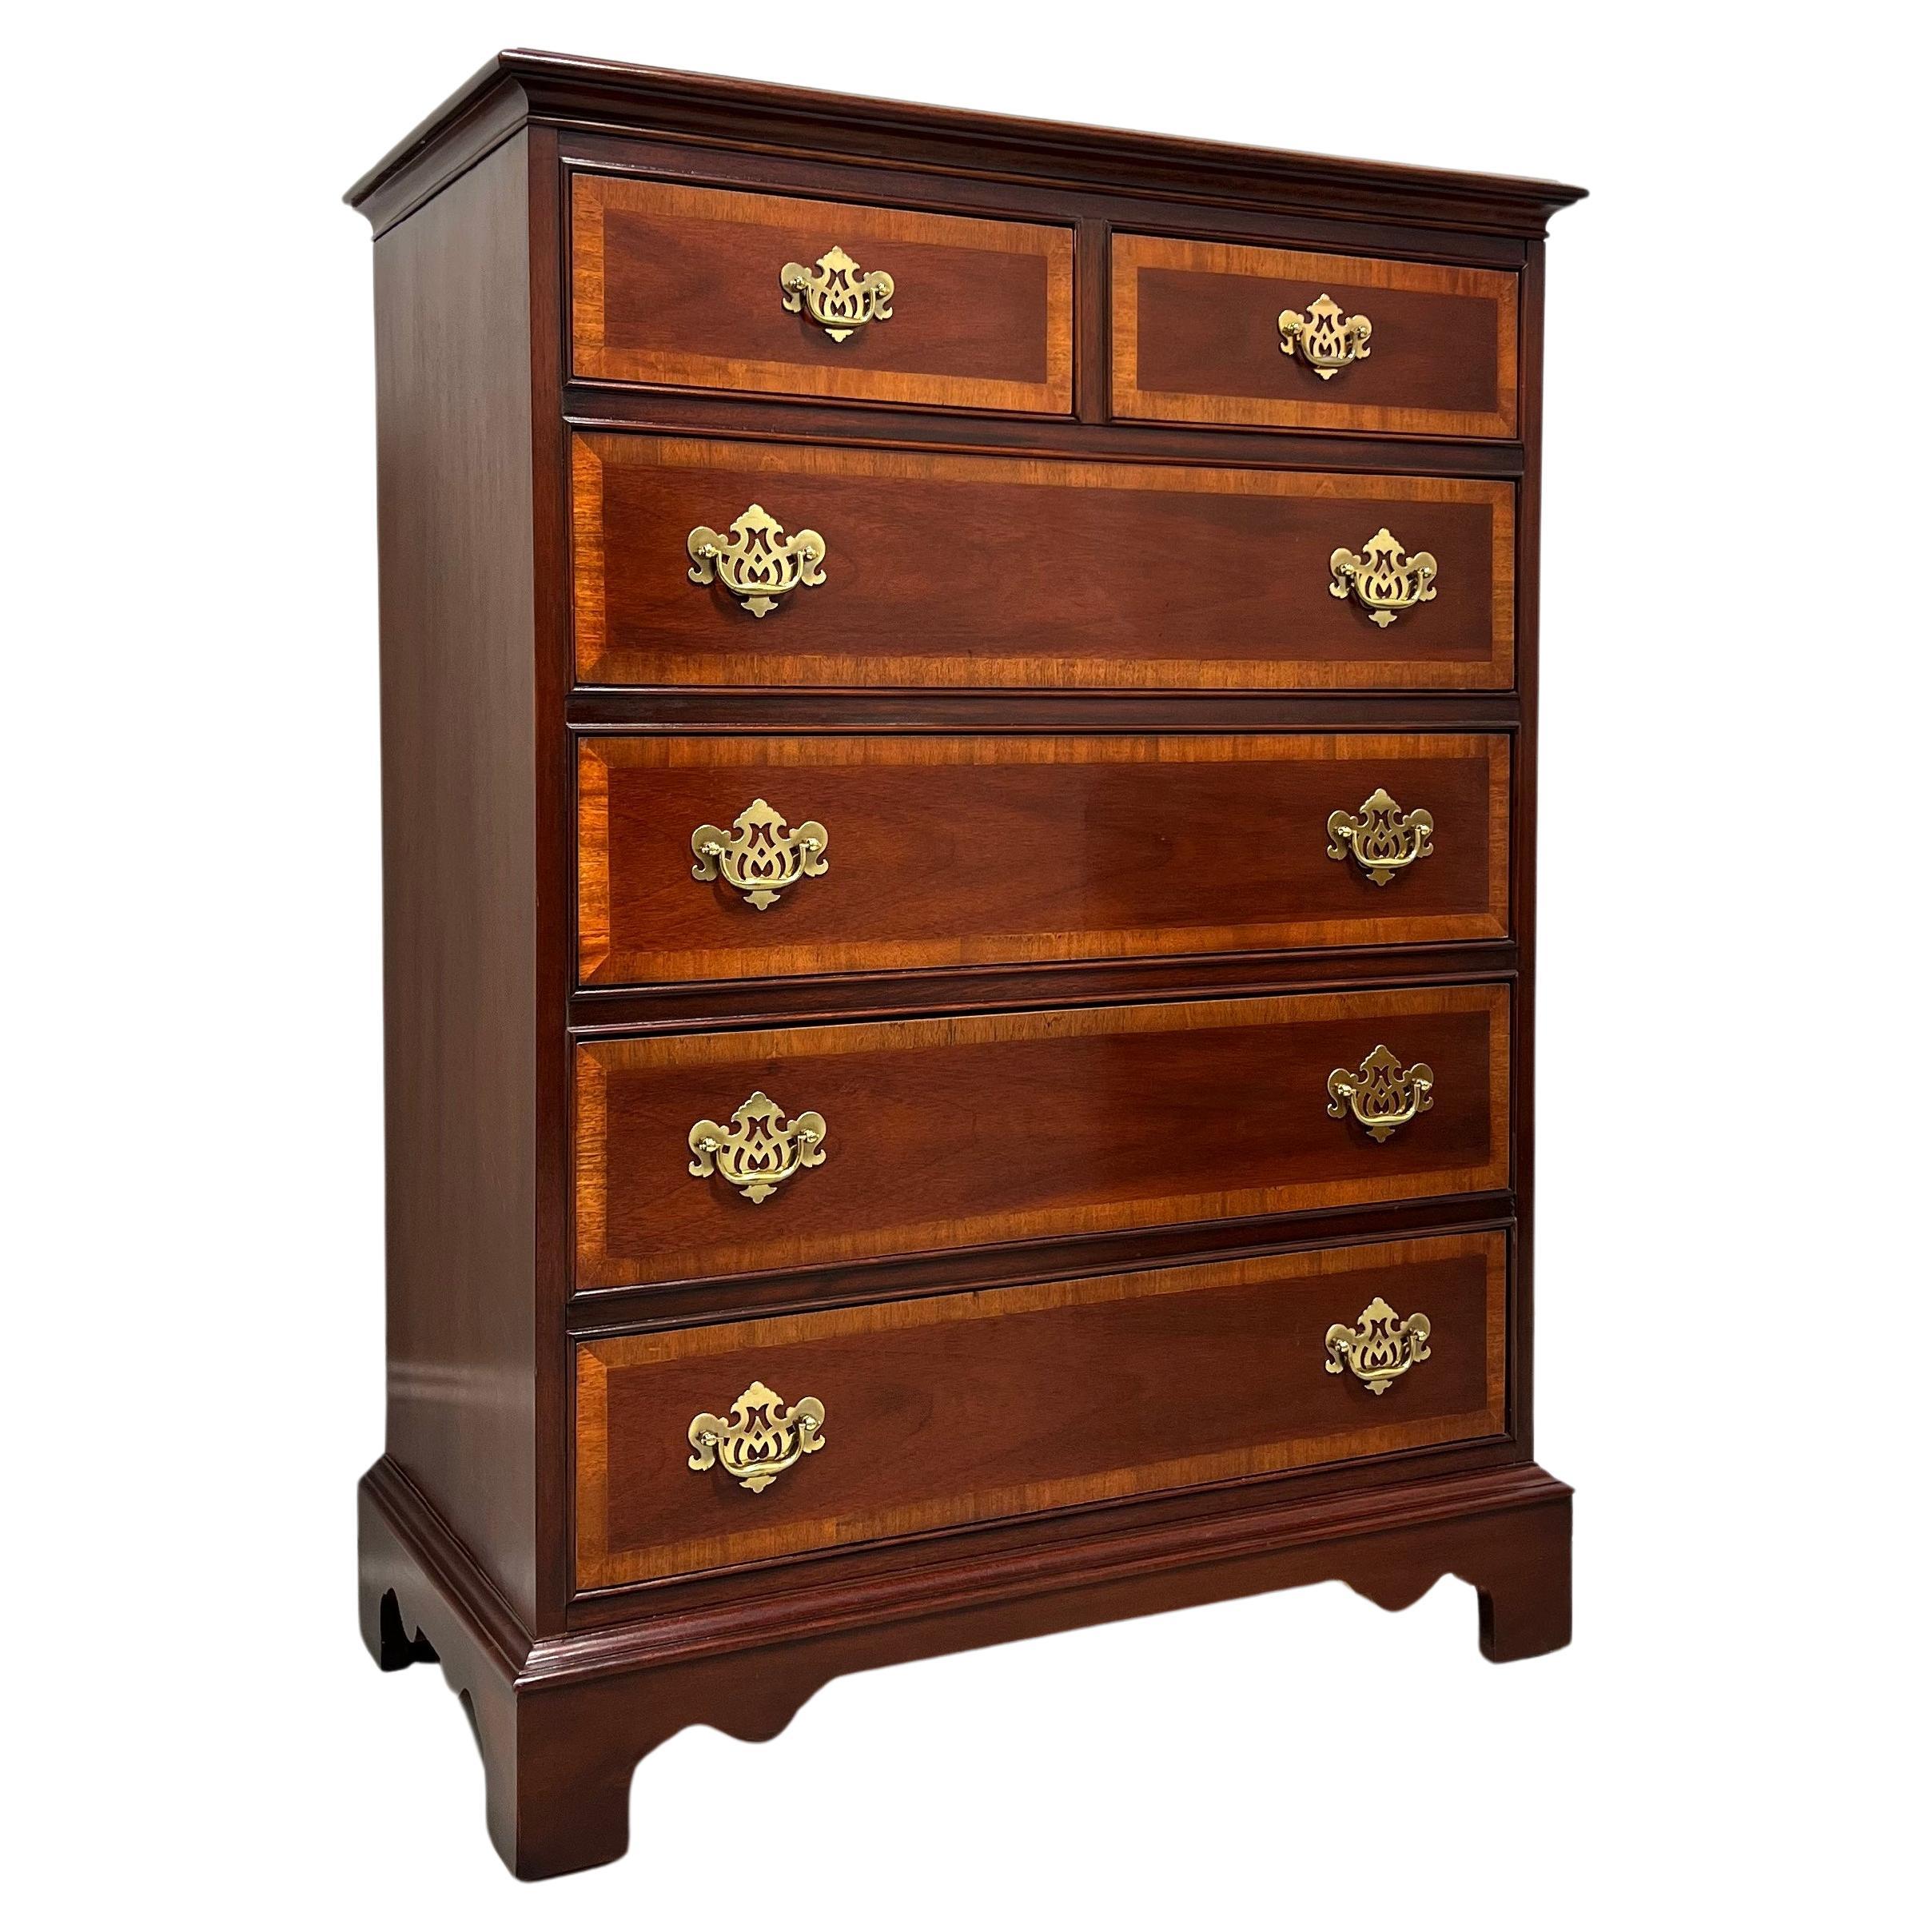 DIXIE Banded Mahogany Chippendale Chest of Six Drawers - B For Sale